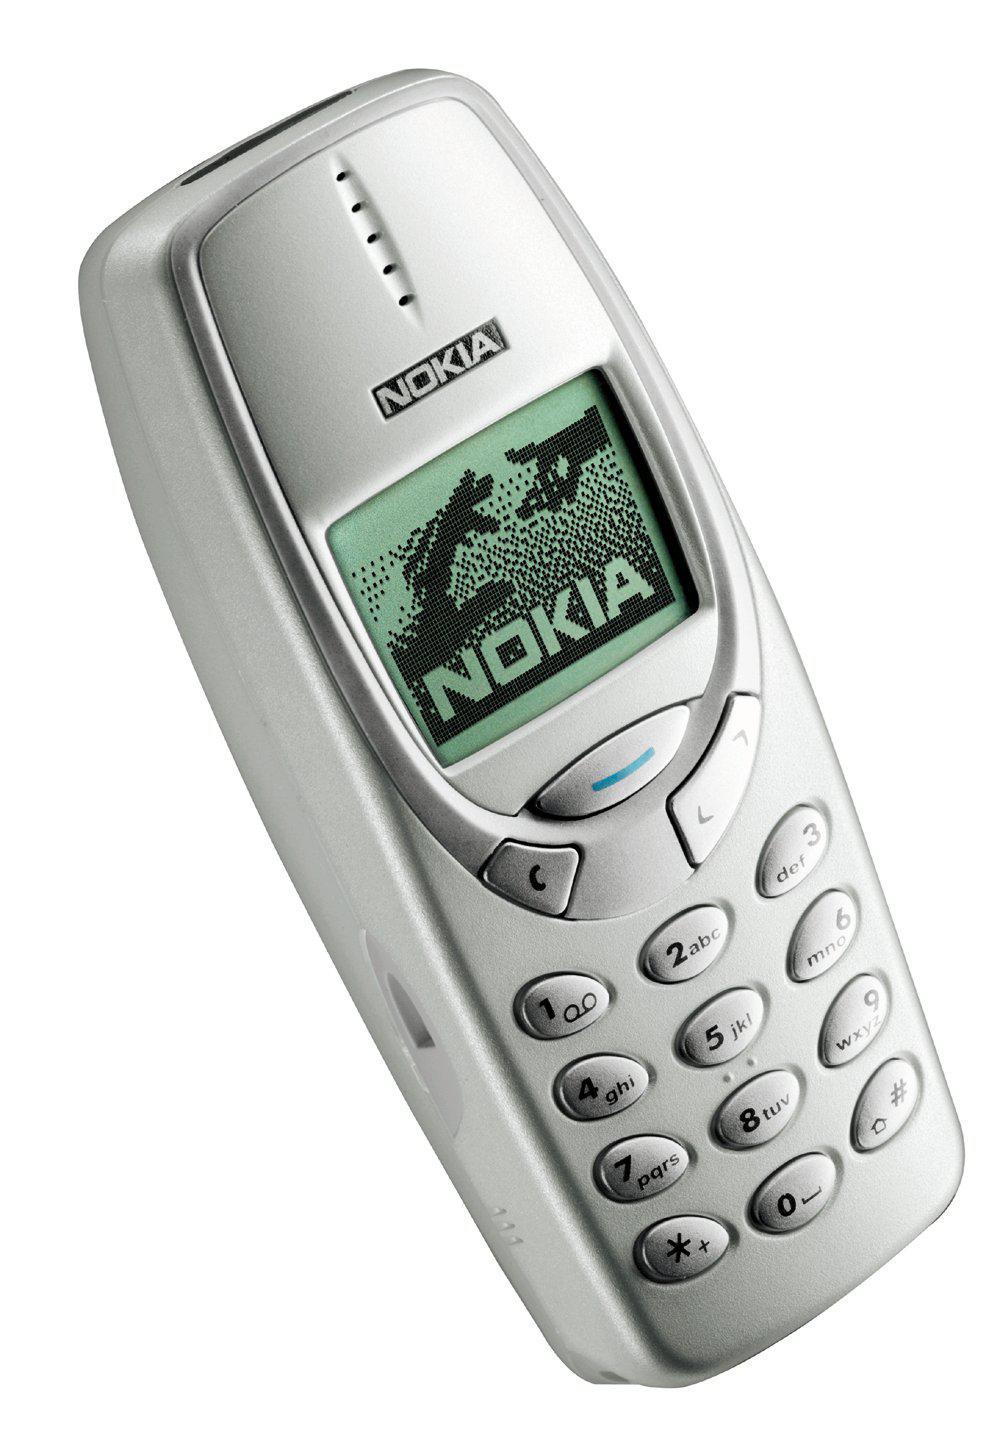 Nokia 3310 will be relaunched later this year, manufacturers have today confirmed